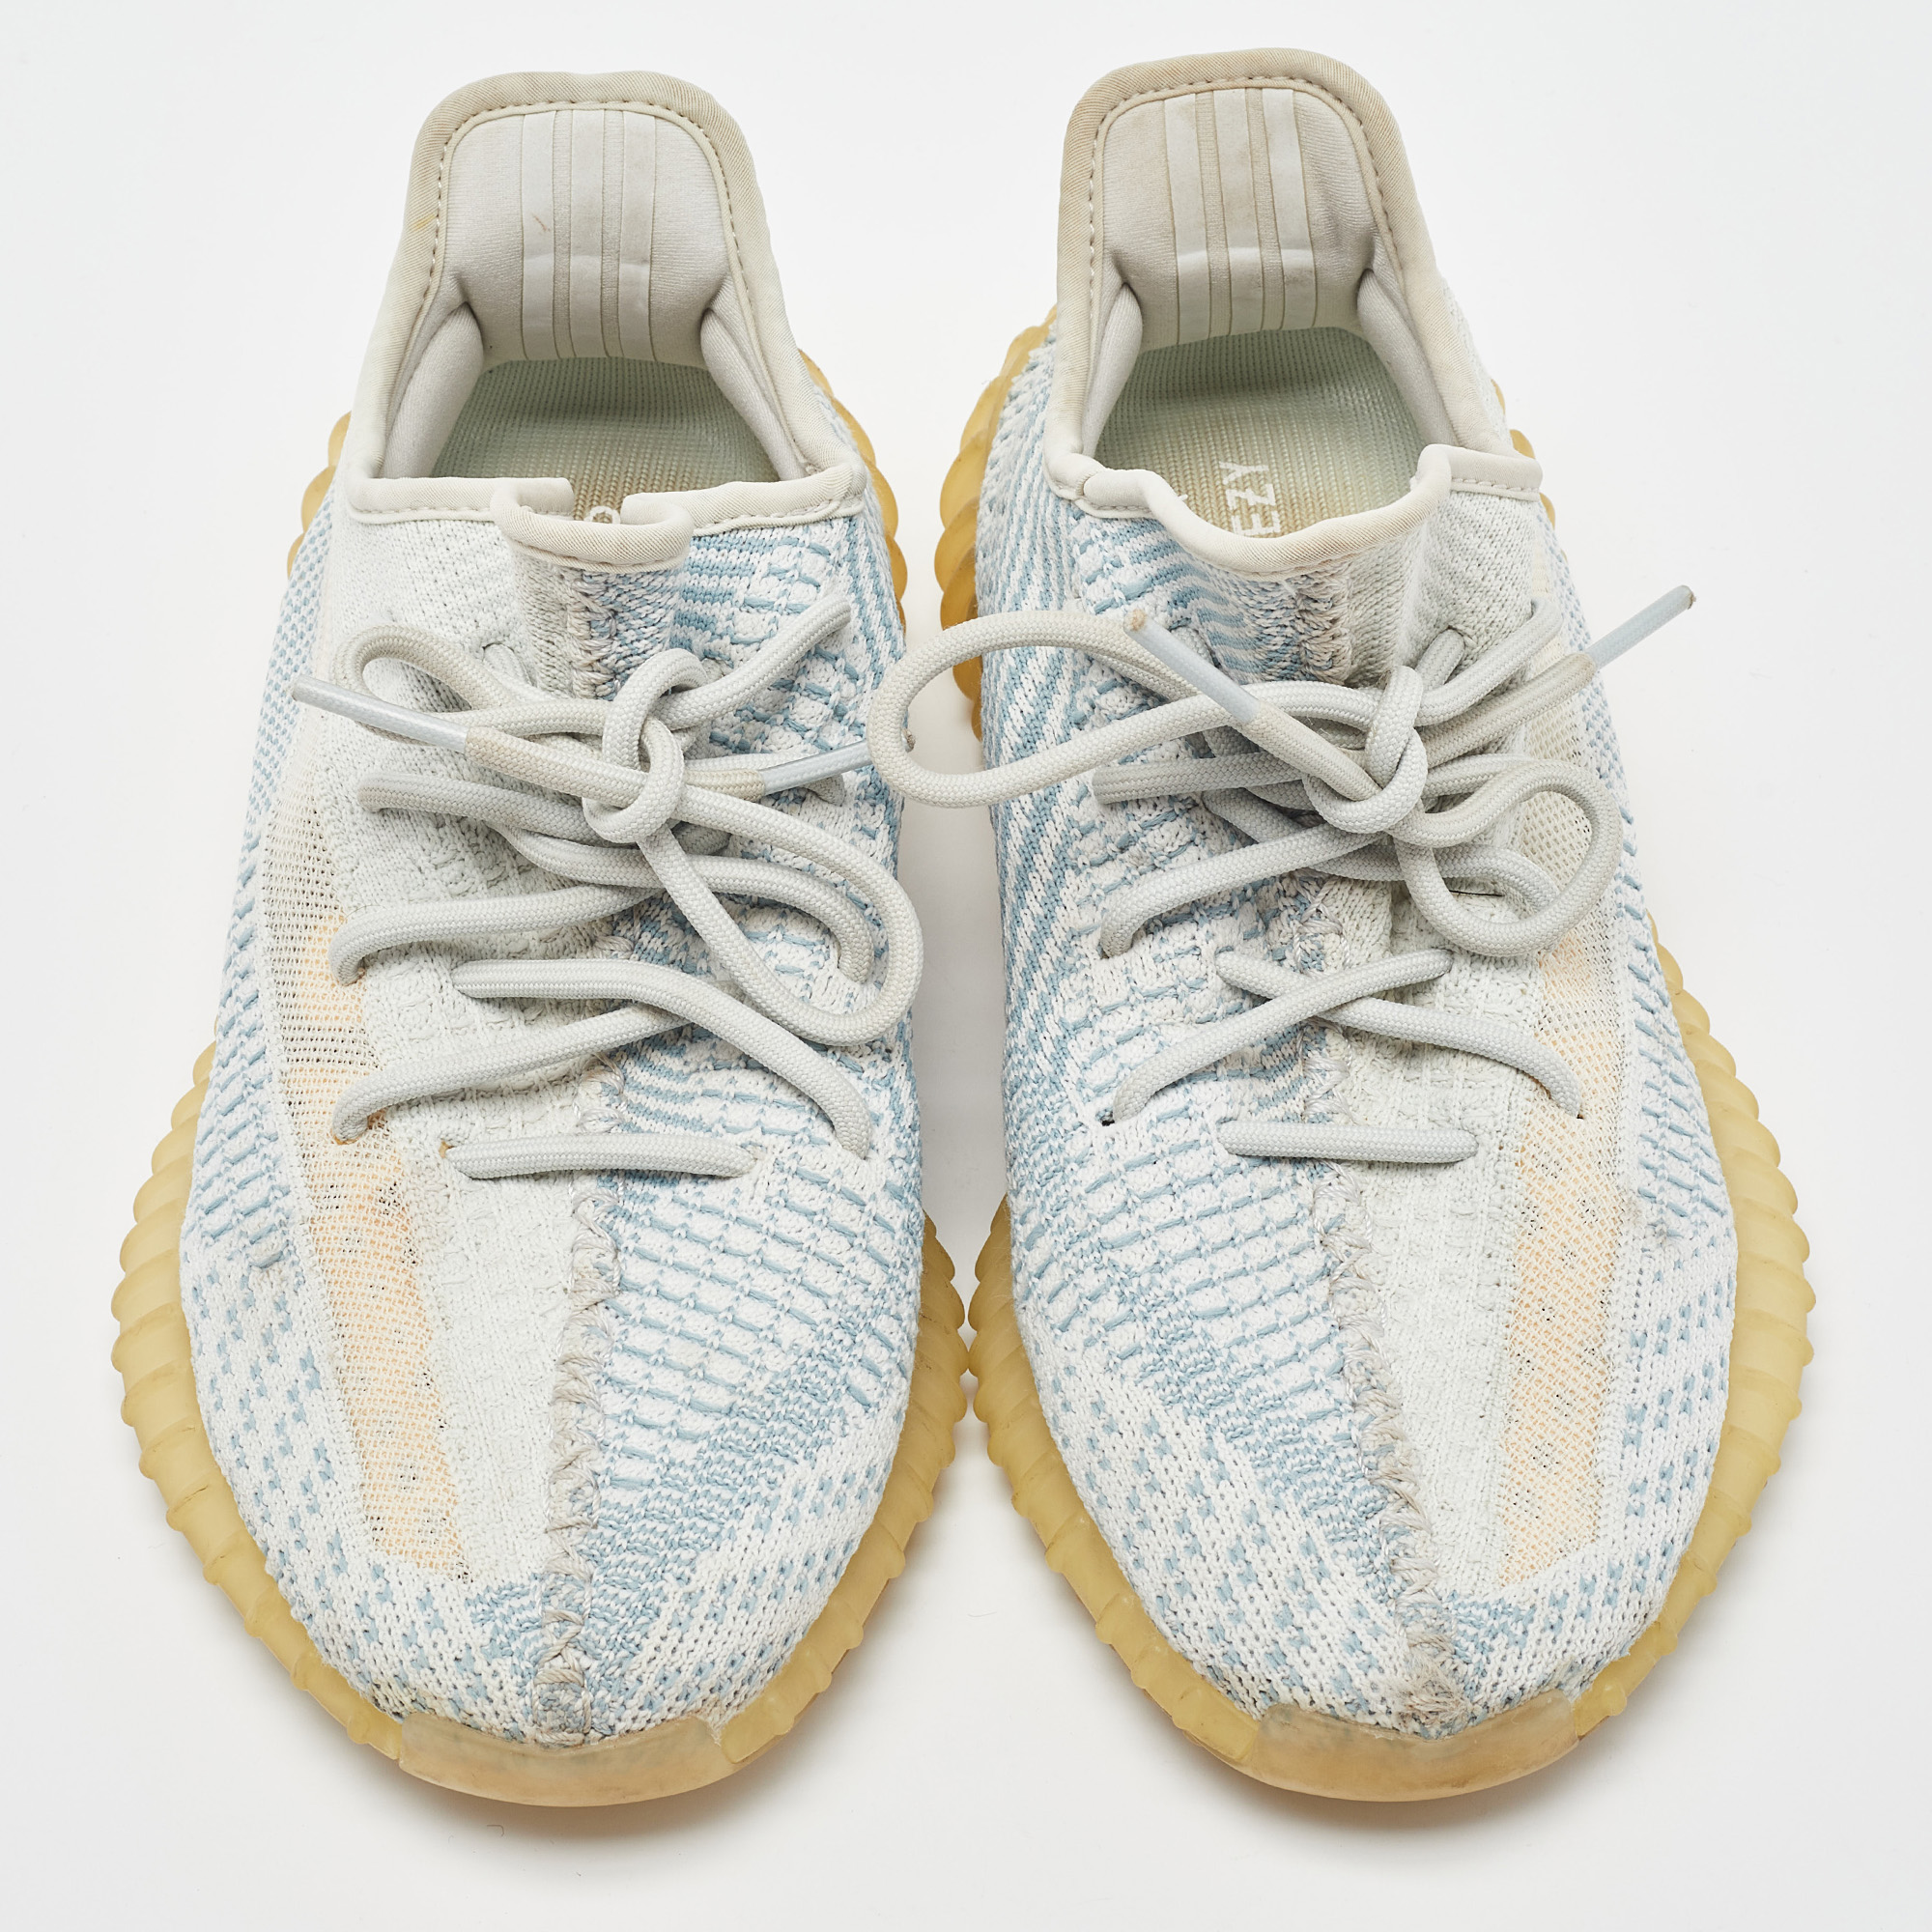 Yeezy X Adidas White/Green Knit Fabric Boost 350 V2 Cloud White Non Reflective Sneakers Size 40 2/3